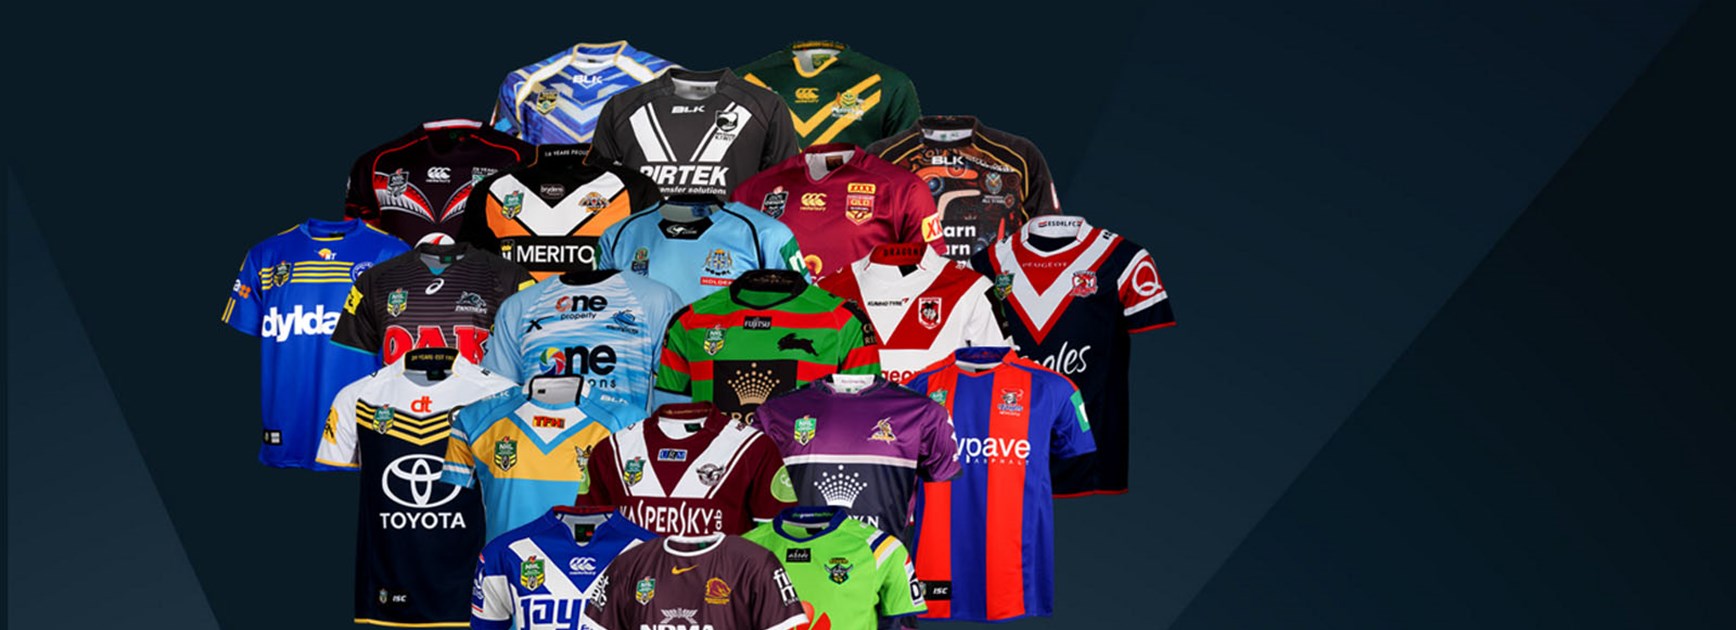 There are plenty of gift ideas at NRLshop.com.